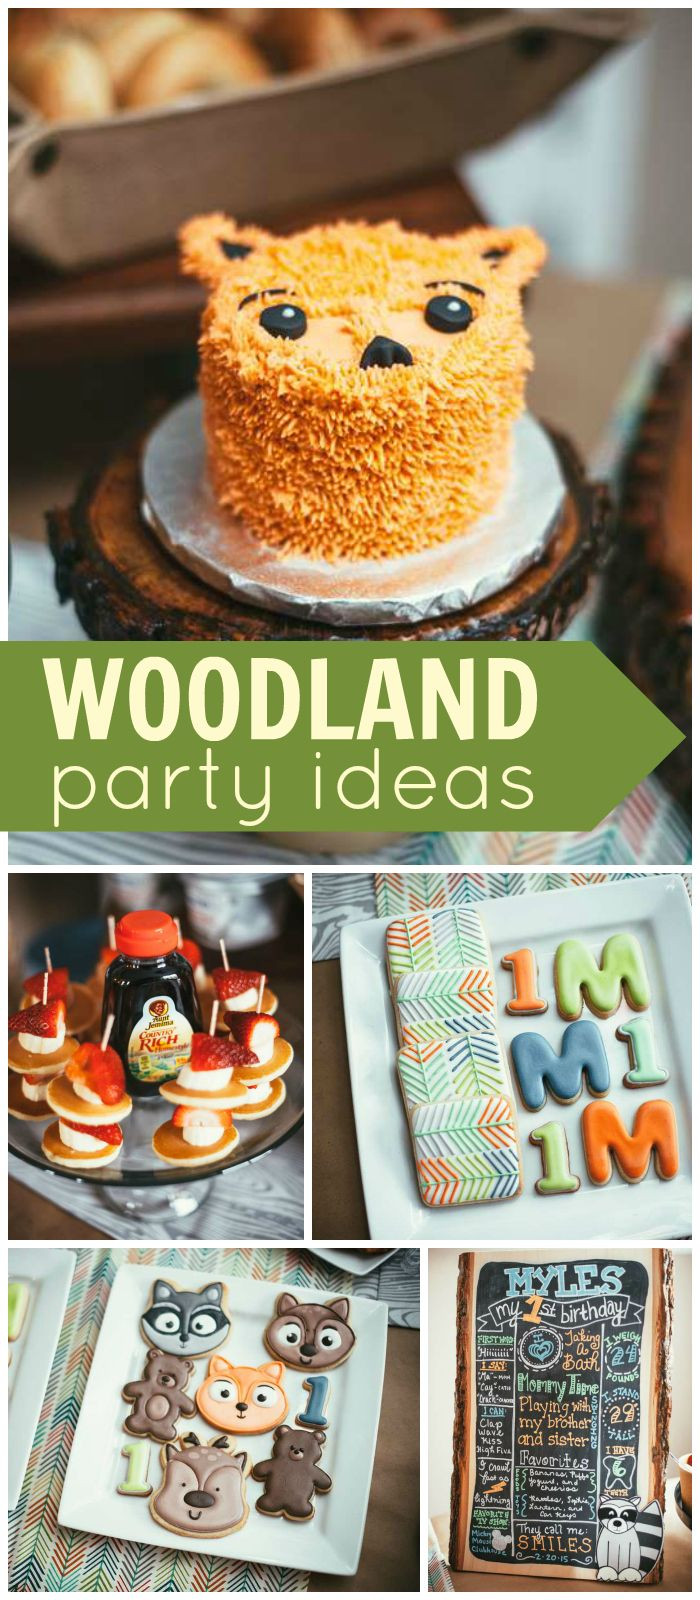 Woodland Birthday Party Food Ideas
 458 best images about Birthday Ideas for the Kids on